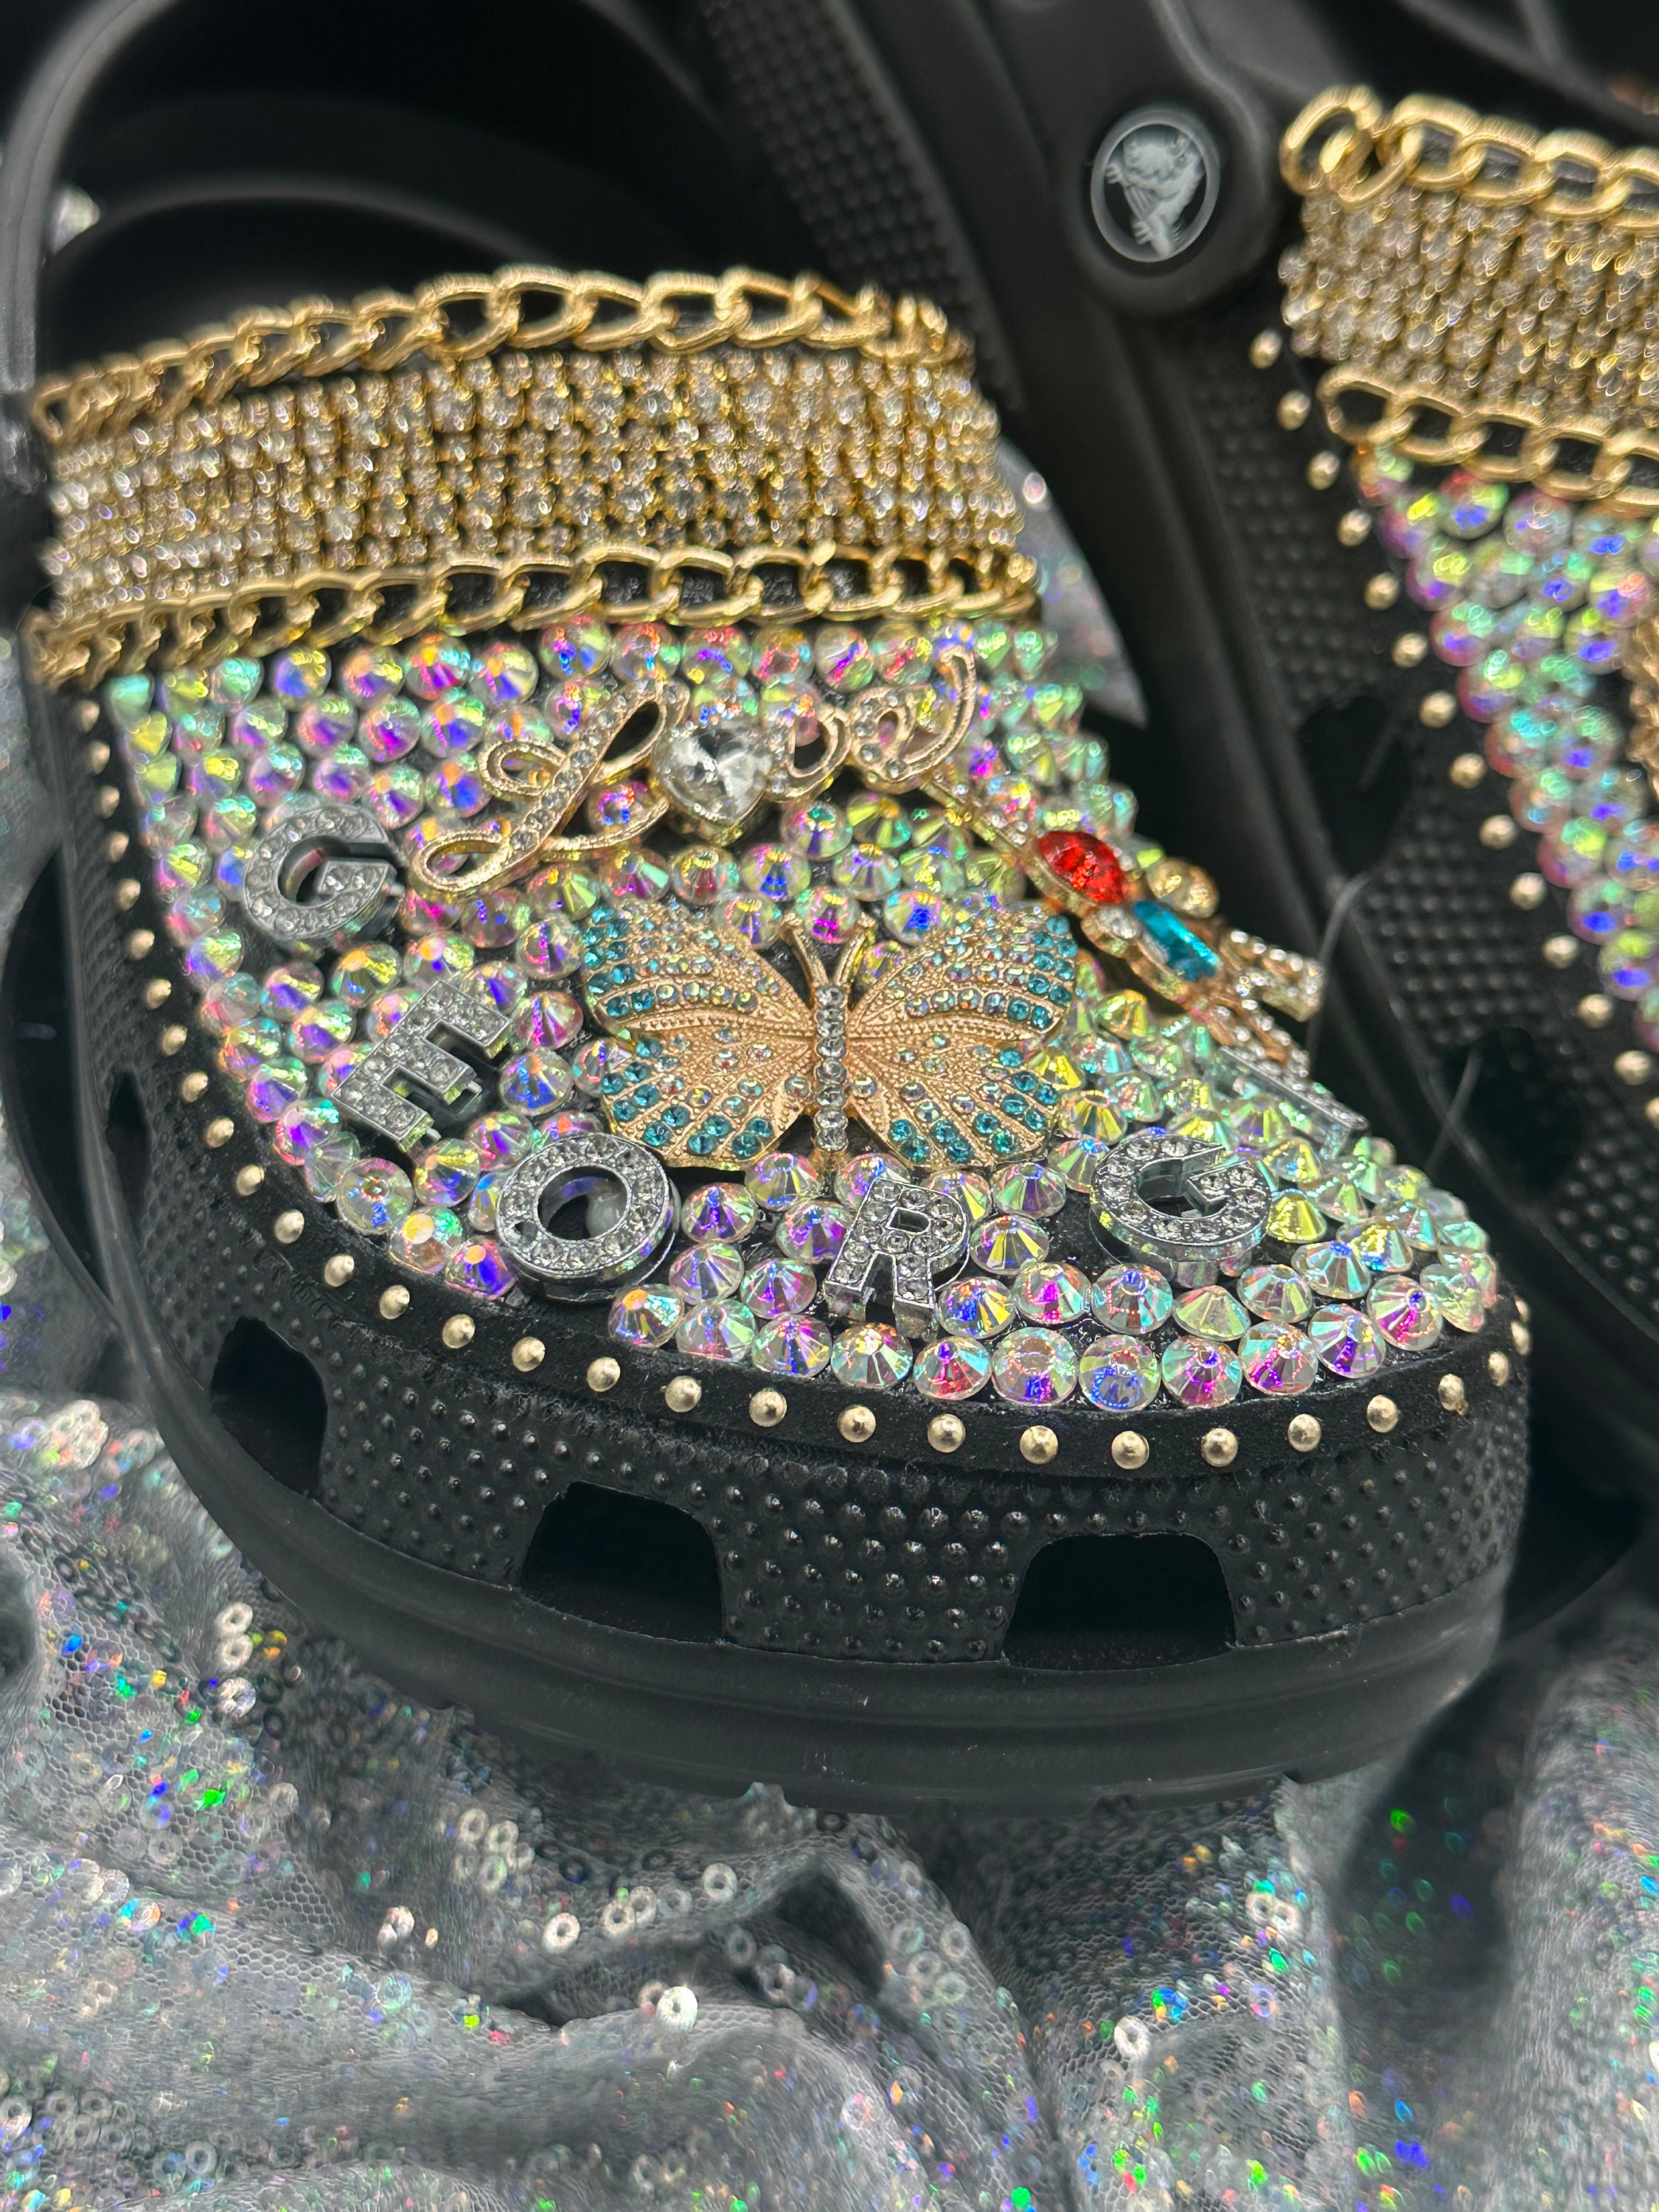 Do you know someone who is this extra? #crocs #croccharms #bling #tren